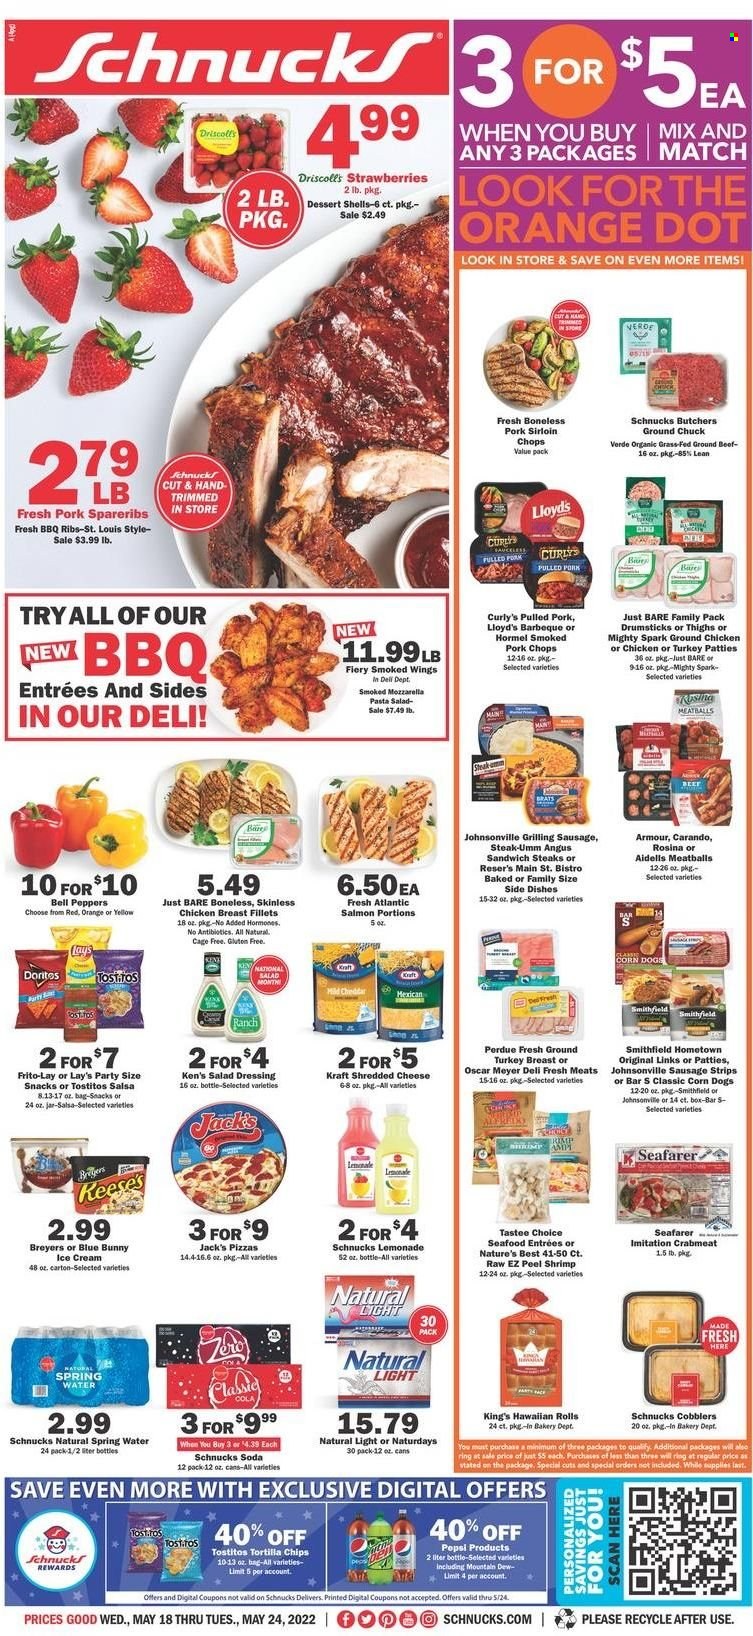 thumbnail - Schnucks Flyer - 05/18/2022 - 05/24/2022 - Sales products - hawaiian rolls, dessert shells, bell peppers, peppers, strawberries, oranges, crab meat, salmon, seafood, shrimps, pizza, meatballs, sandwich, pasta, Kraft®, pulled pork, Hormel, Johnsonville, sausage, pasta salad, shredded cheese, cage free eggs, ice cream, Reese's, Blue Bunny, strips, snack, Doritos, tortilla chips, chips, Lay’s, Frito-Lay, Tostitos, salad dressing, dressing, salsa, lemonade, spring water, soda, ground chicken, turkey breast, chicken breasts, beef meat, ground beef, ground chuck, steak, pork chops, pork loin, pork meat, pork spare ribs. Page 1.